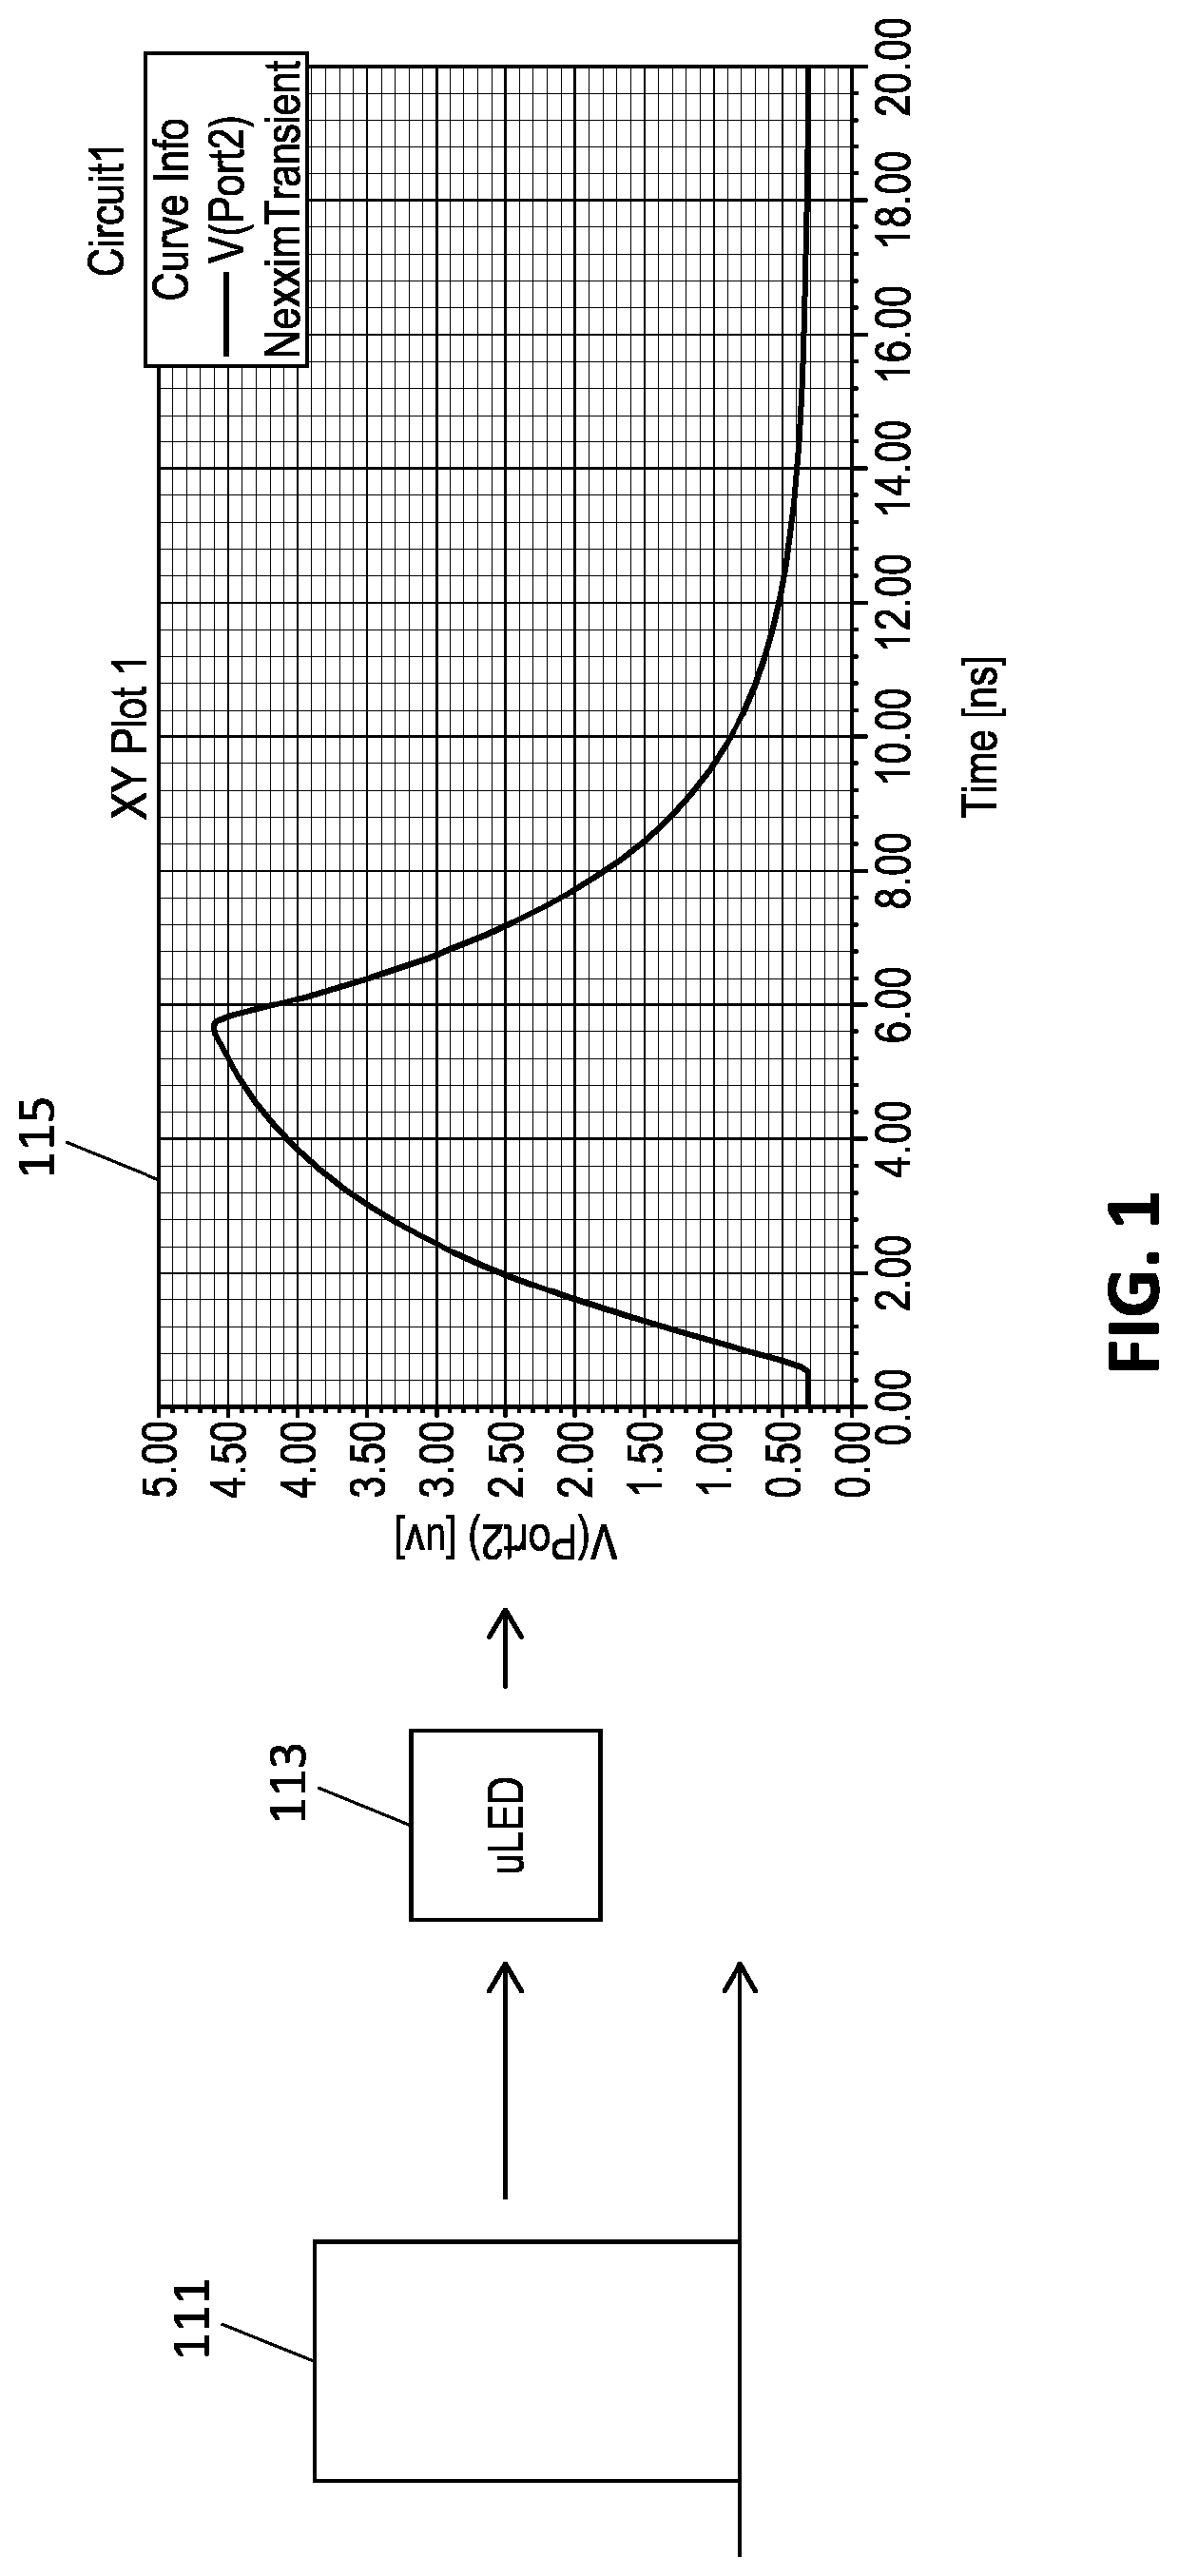 Optical transceiver design for short distance communication systems based on microLEDs